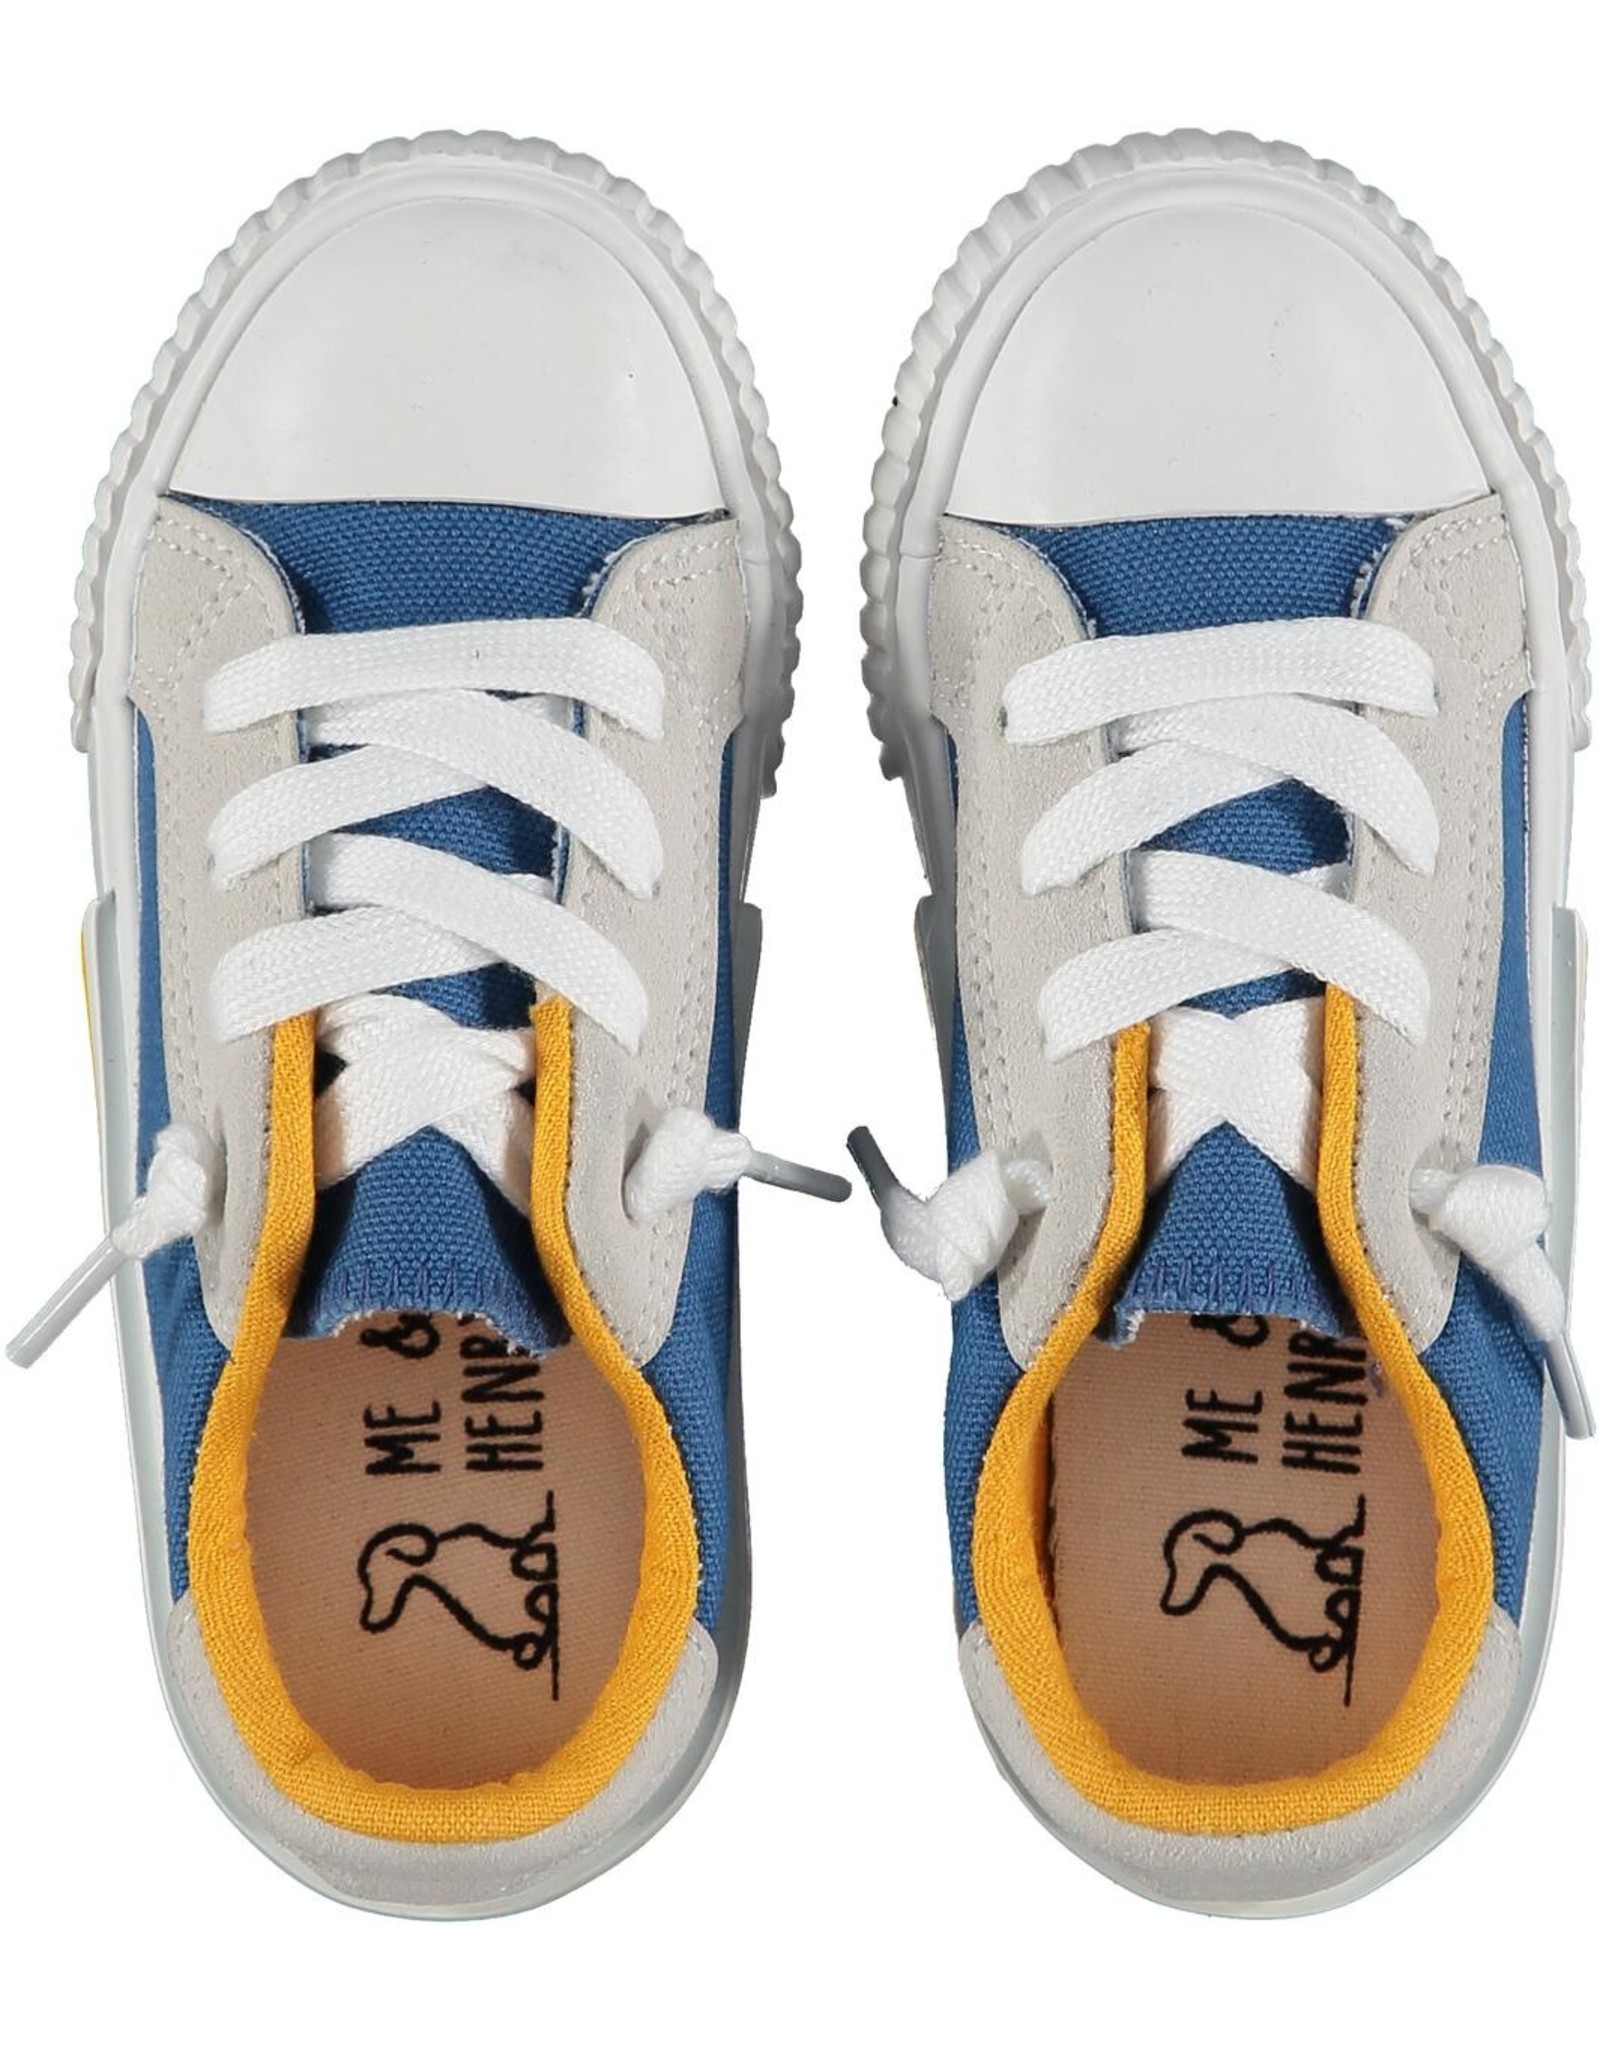 Me & Henry Harbour Canvas Sneakers-Blue Multi